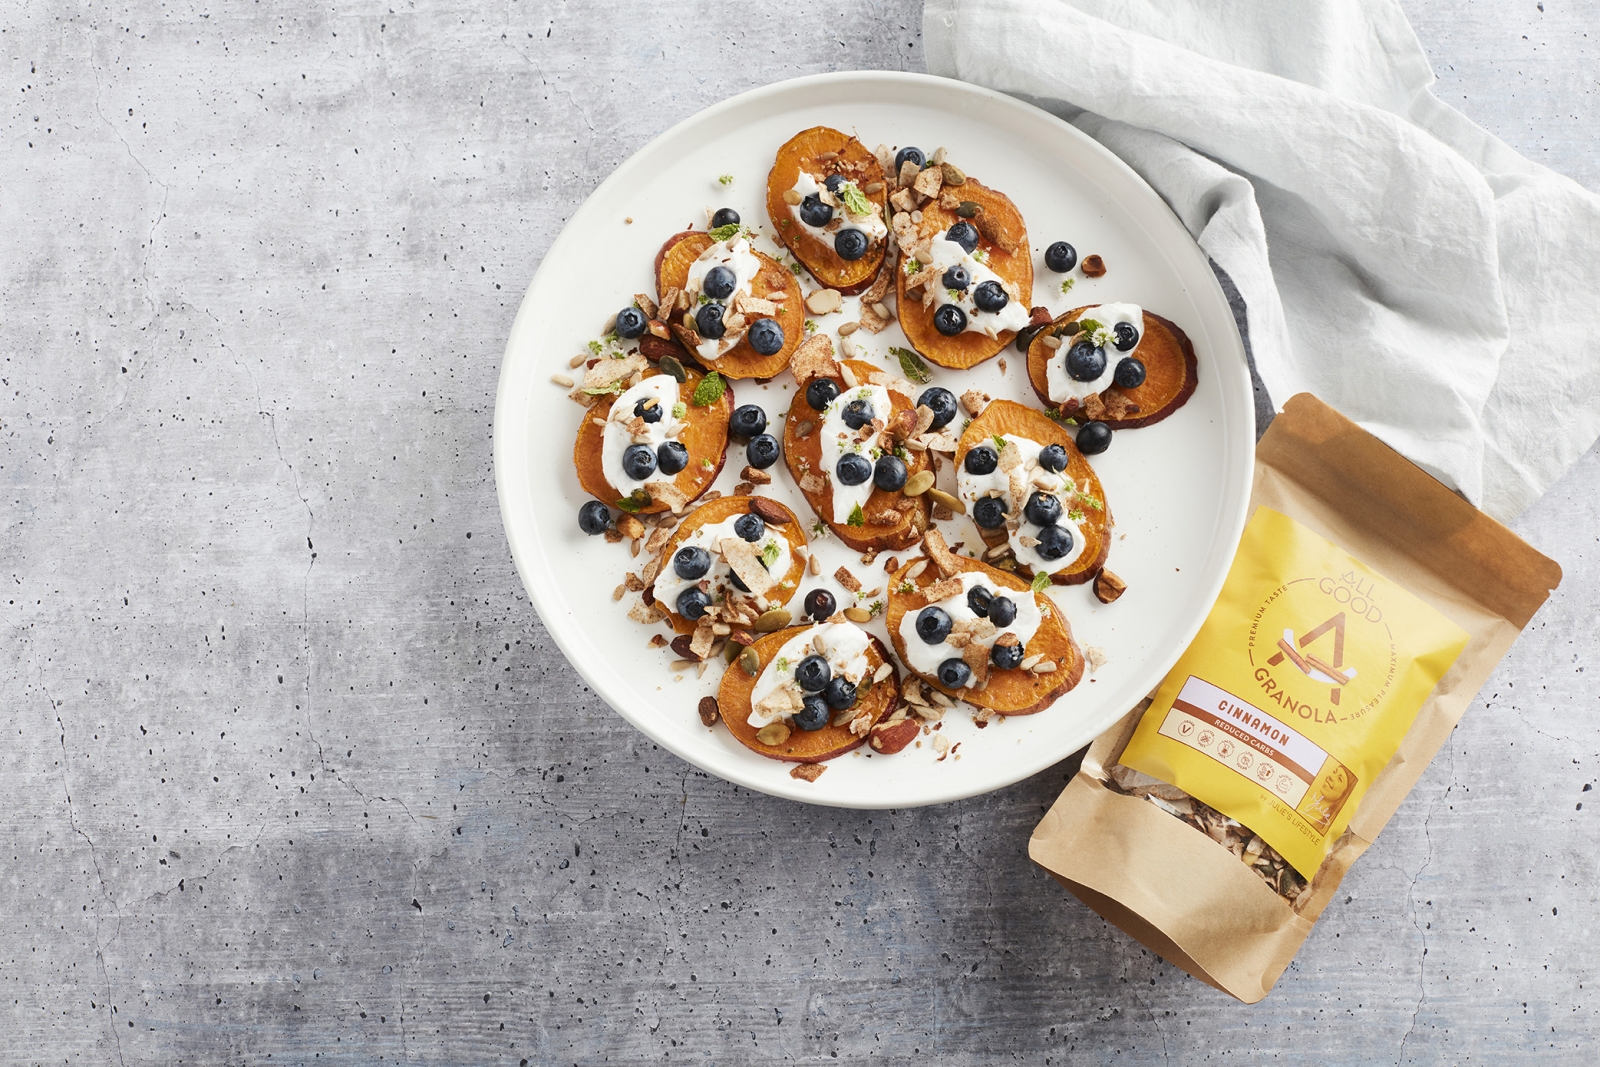 Looking for easy gluten free breakfast recipes? Boost your energy with this Sweet Potato Toast with Yoghurt and Granola!